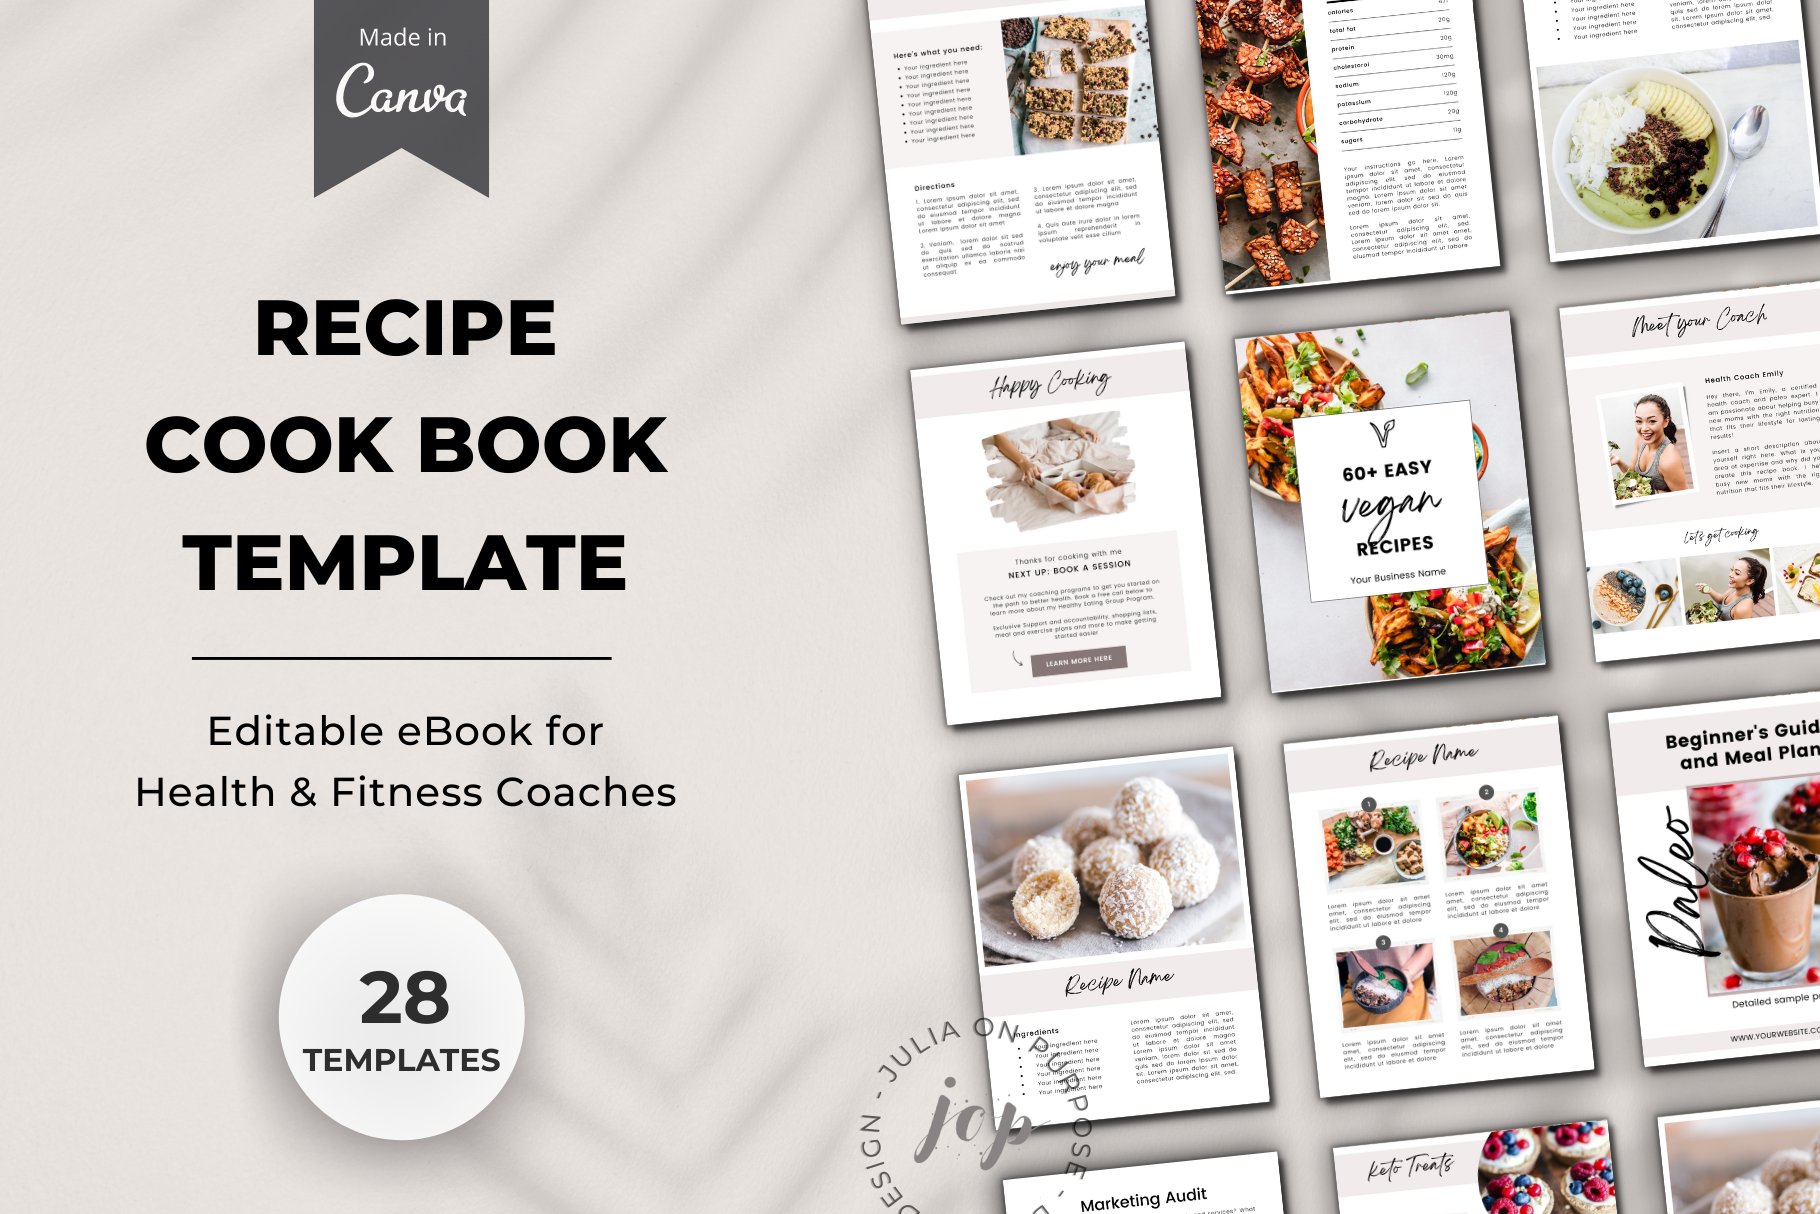 Recipe Book Template for Canva cover image.